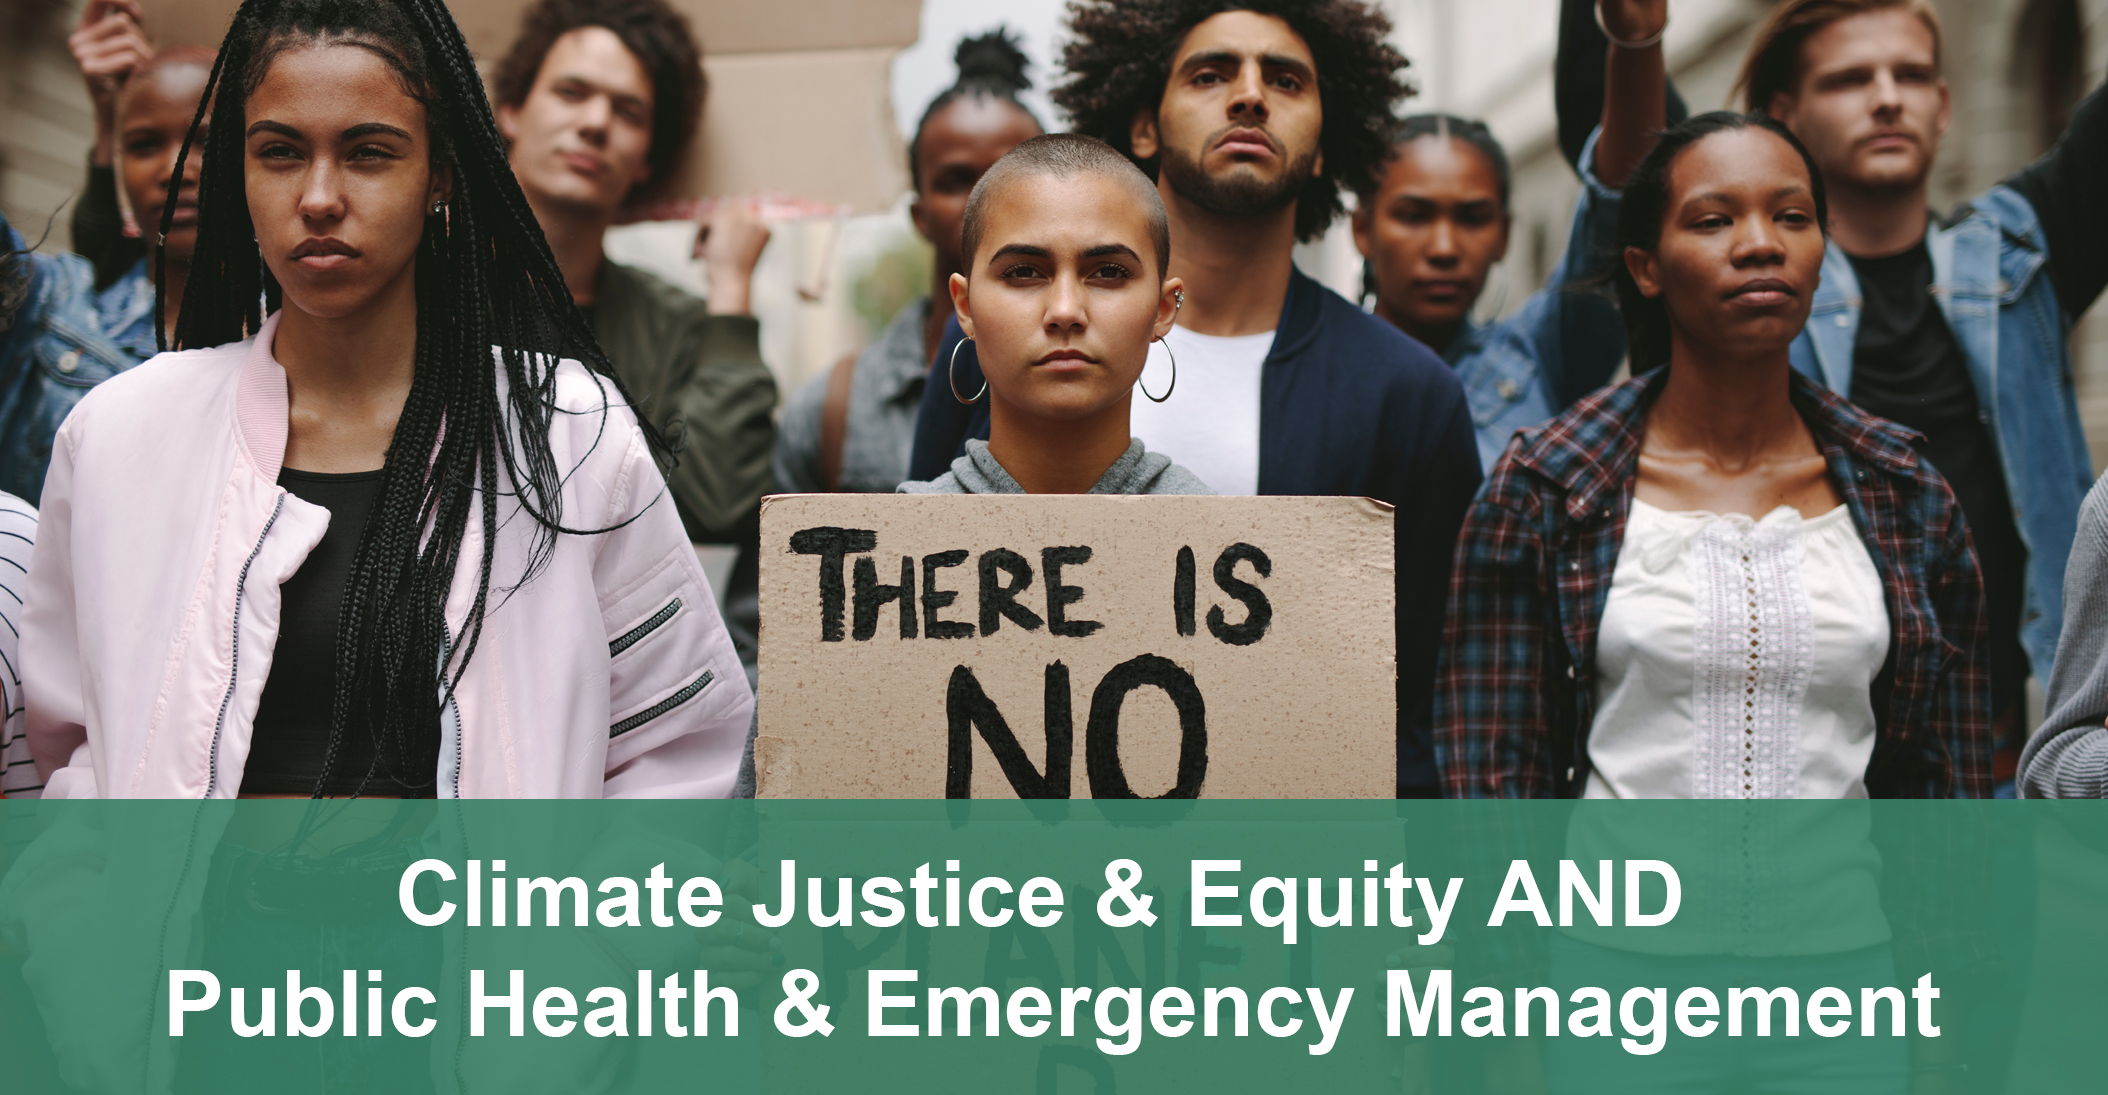 Climate Justice & Equity AND Public Health & Emergency Management